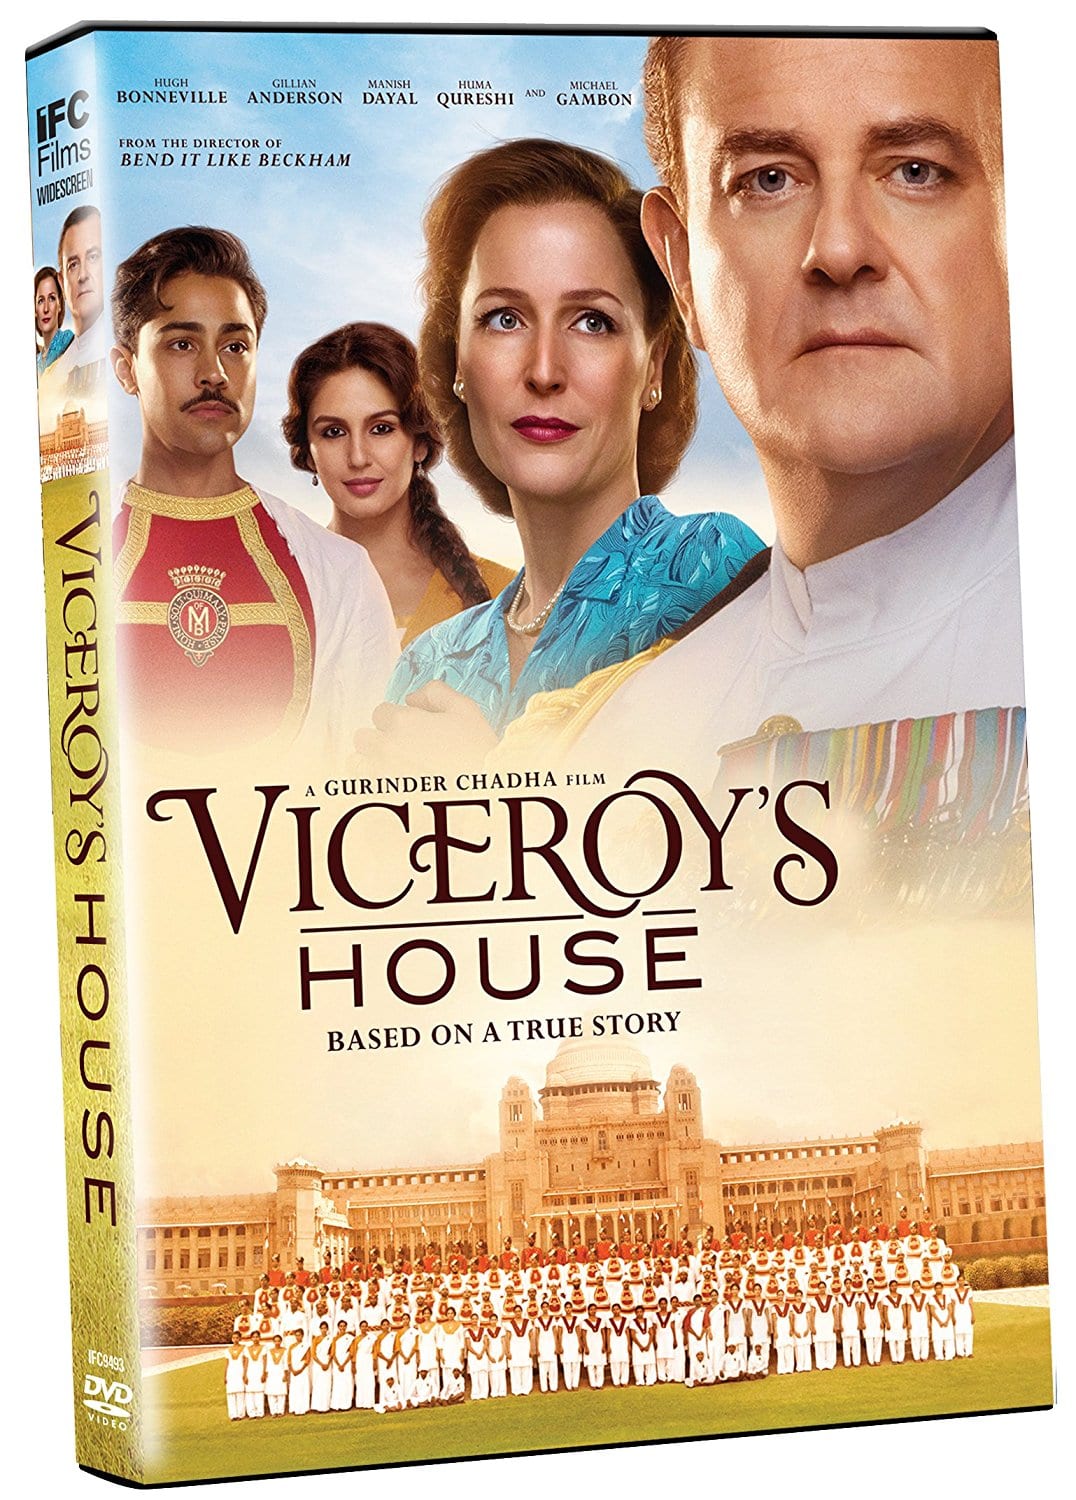 Viceroy's House, a clean inspiring movie on Netflix